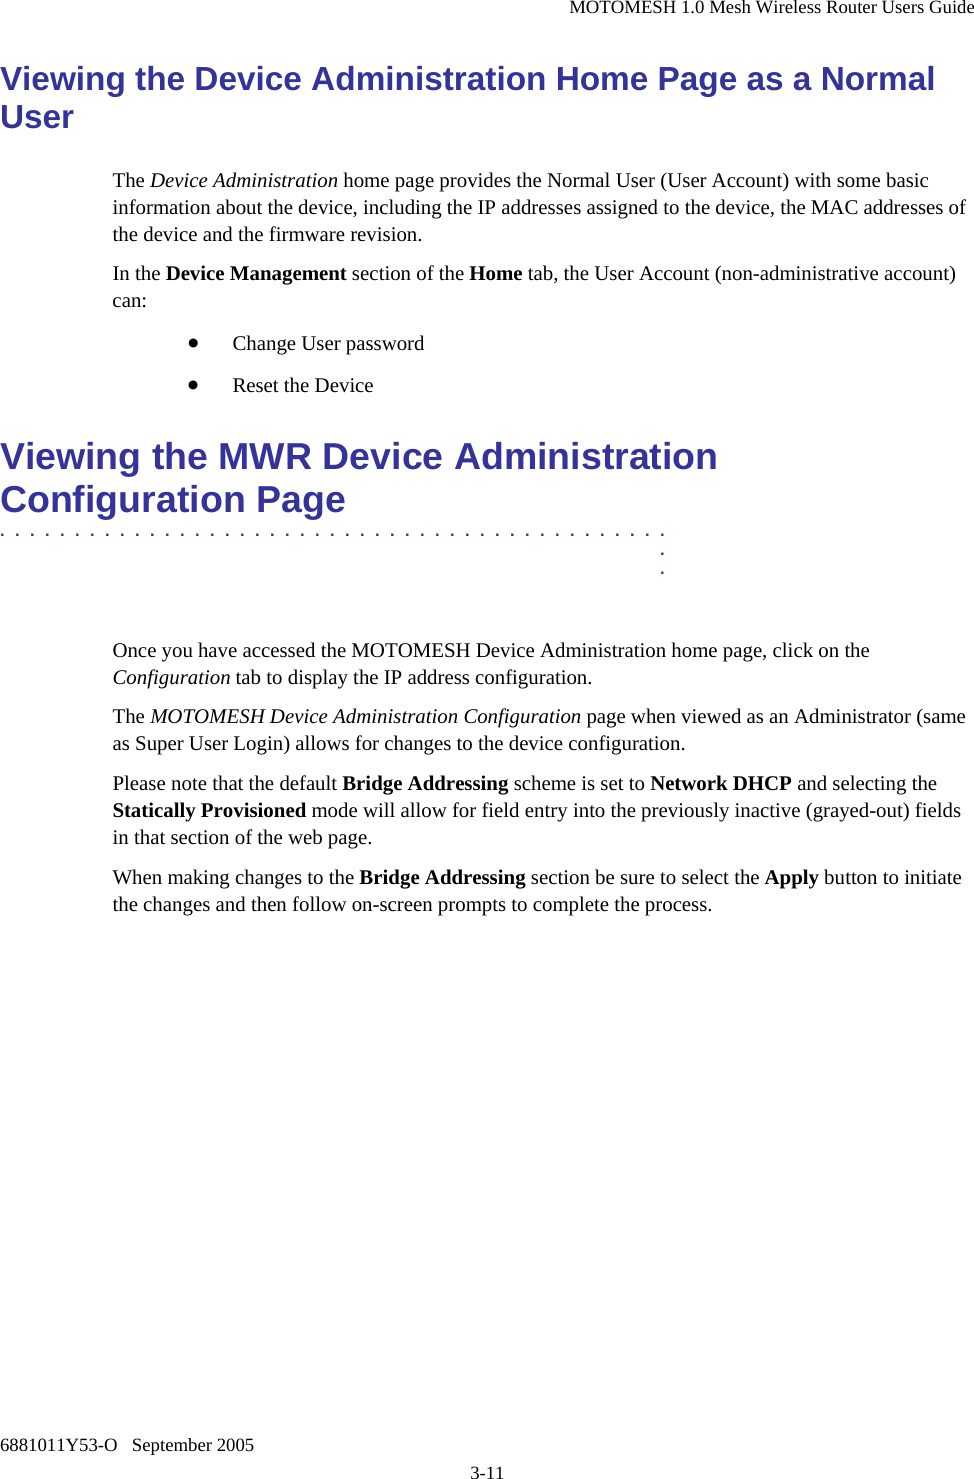 MOTOMESH 1.0 Mesh Wireless Router Users Guide 6881011Y53-O   September 2005 3-11 Viewing the Device Administration Home Page as a Normal User The Device Administration home page provides the Normal User (User Account) with some basic information about the device, including the IP addresses assigned to the device, the MAC addresses of the device and the firmware revision.  In the Device Management section of the Home tab, the User Account (non-administrative account) can: • Change User password • Reset the Device Viewing the MWR Device Administration Configuration Page .............................................  .  .  Once you have accessed the MOTOMESH Device Administration home page, click on the Configuration tab to display the IP address configuration.  The MOTOMESH Device Administration Configuration page when viewed as an Administrator (same as Super User Login) allows for changes to the device configuration. Please note that the default Bridge Addressing scheme is set to Network DHCP and selecting the Statically Provisioned mode will allow for field entry into the previously inactive (grayed-out) fields in that section of the web page.  When making changes to the Bridge Addressing section be sure to select the Apply button to initiate the changes and then follow on-screen prompts to complete the process.  